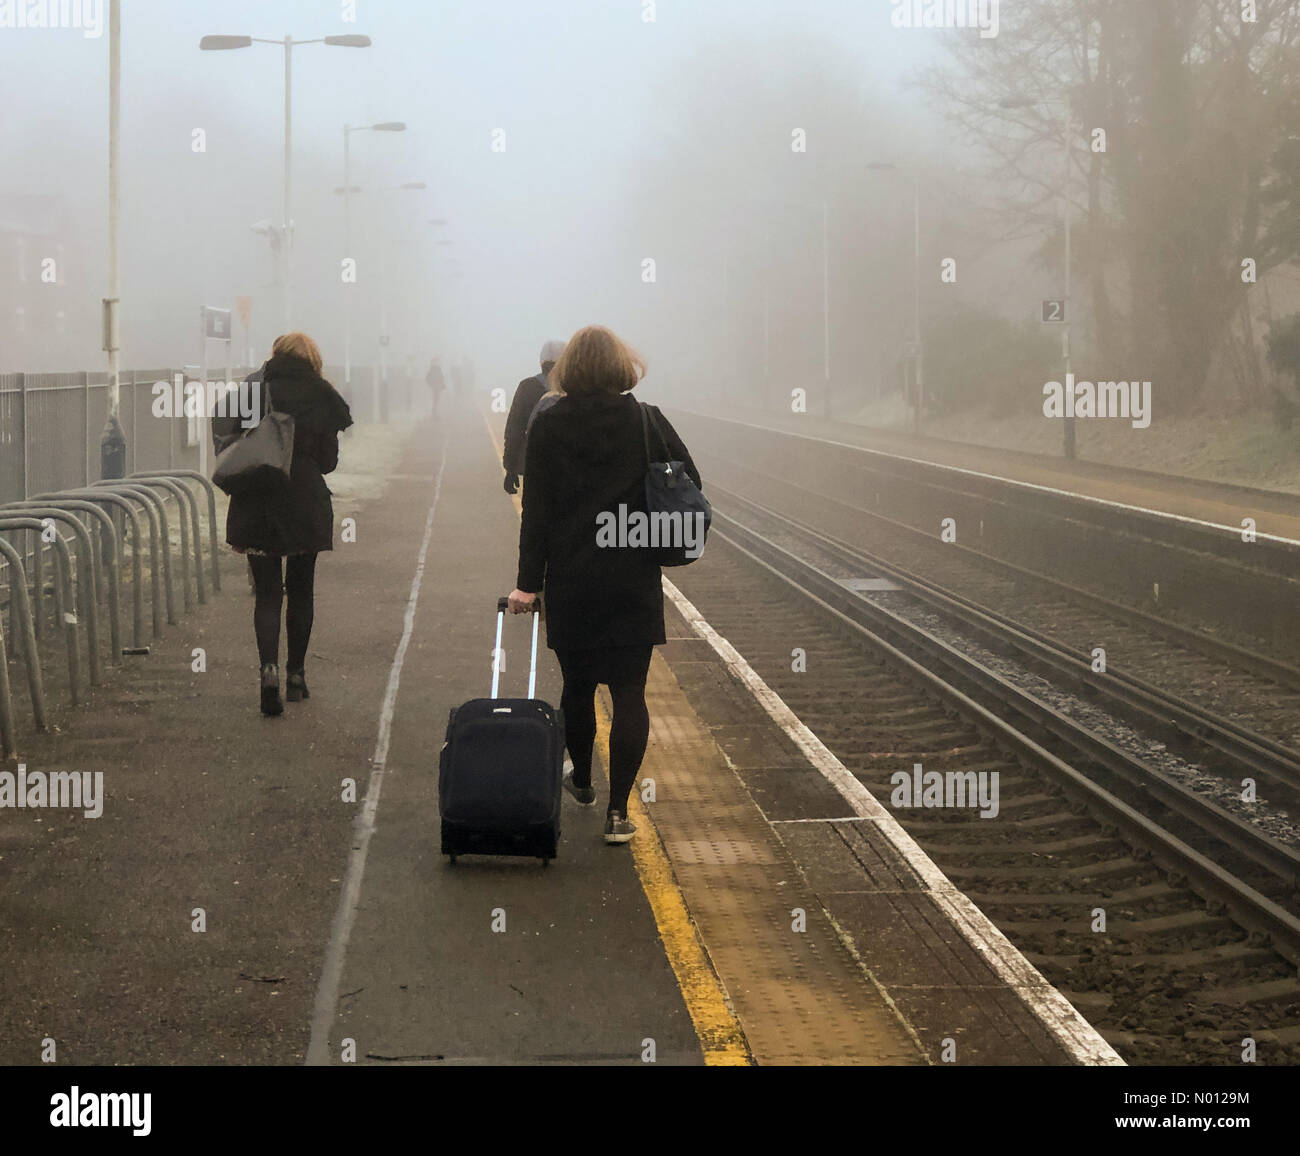 UK Weather: Foggy in Godalming. Station Lane, Godalming. 21st January 2020. Freezing fog across the Home Counties this morning. A foggy commute from Godalming in Surrey. Credit: jamesjagger/StockimoNews/Alamy Live News Stock Photo